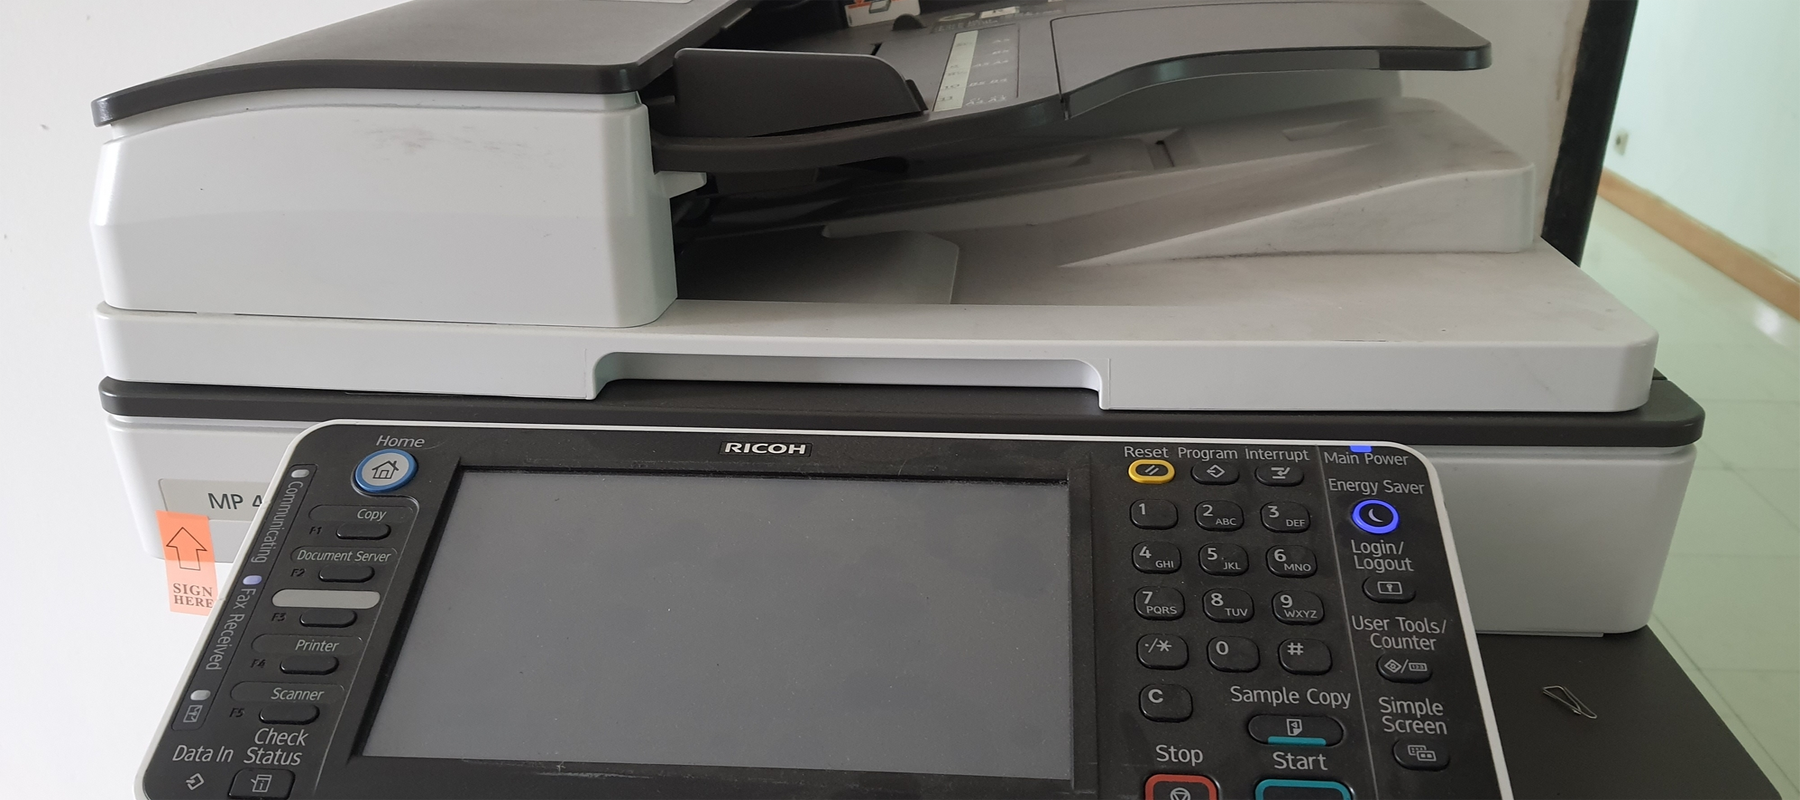 How Much Does a Ricoh Copier Cost?